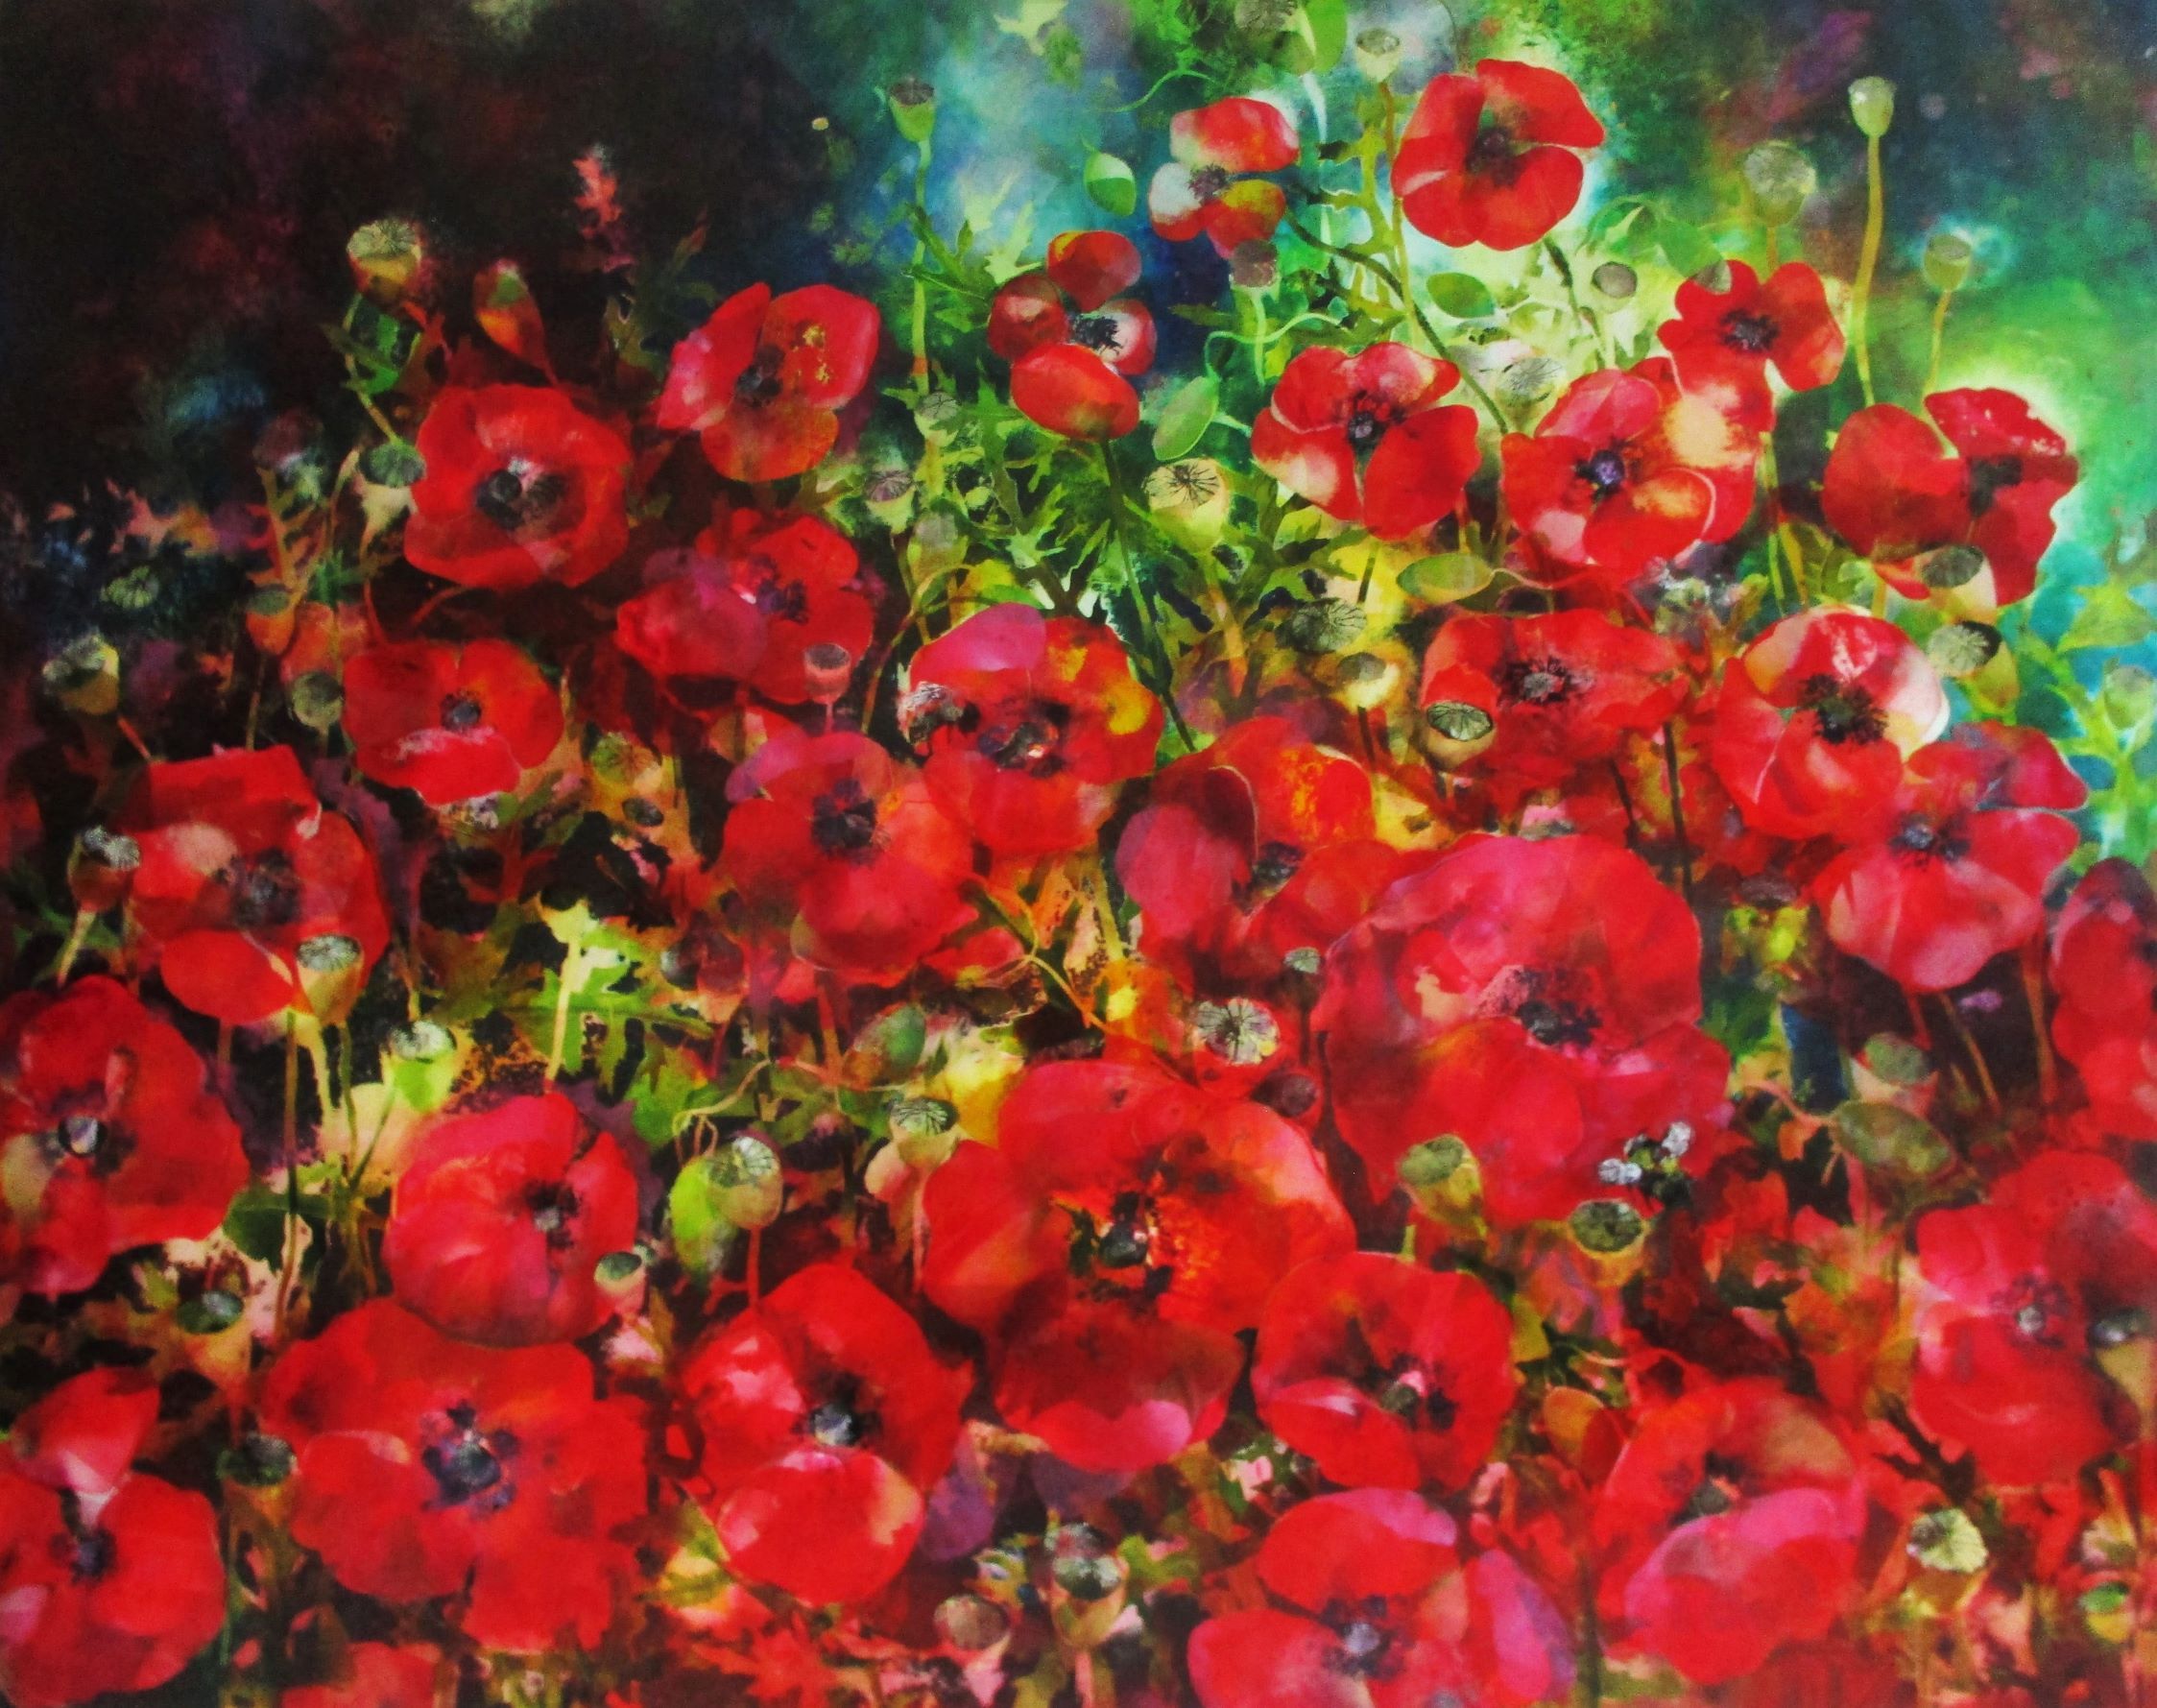 Late Afternoon Sunshine (poppies) by Ann Bridges